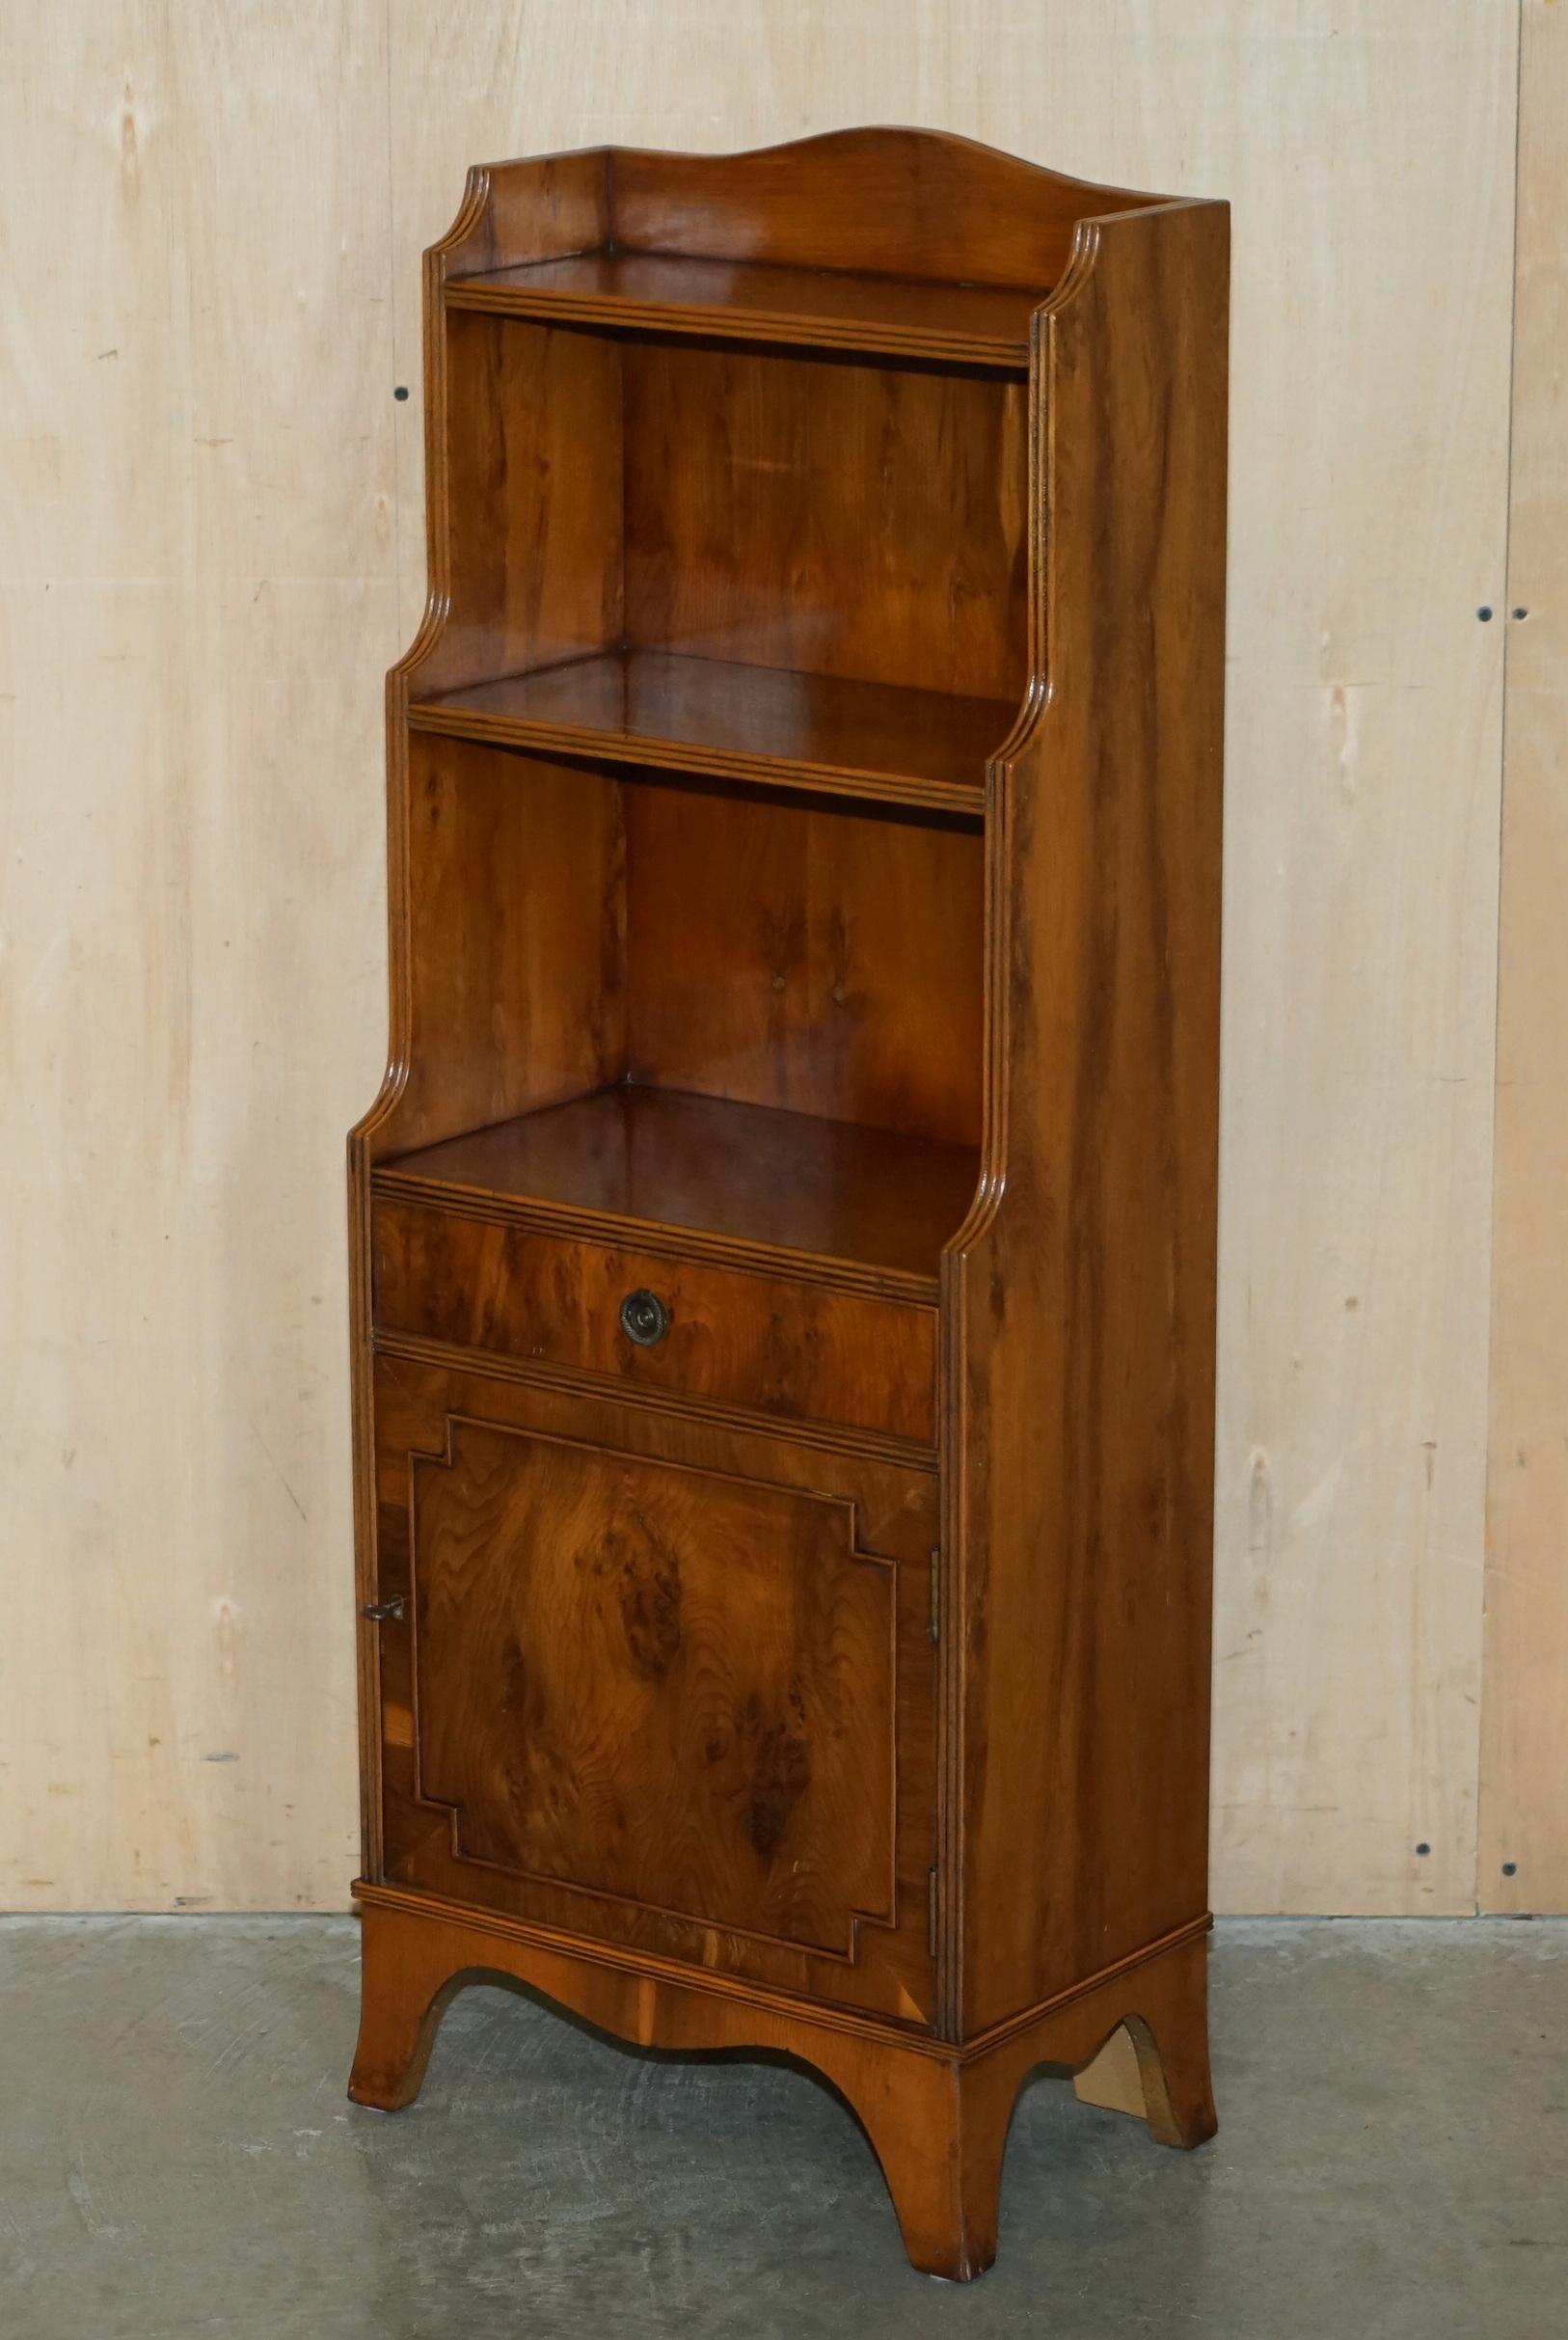 Royal House Antiques

Royal House Antiques is delighted to offer for sale this lovely pair of vintage Flamed Mahogany waterfall bookcases with single drawers and cupboard bases 

Please note the delivery fee listed is just a guide, it covers within